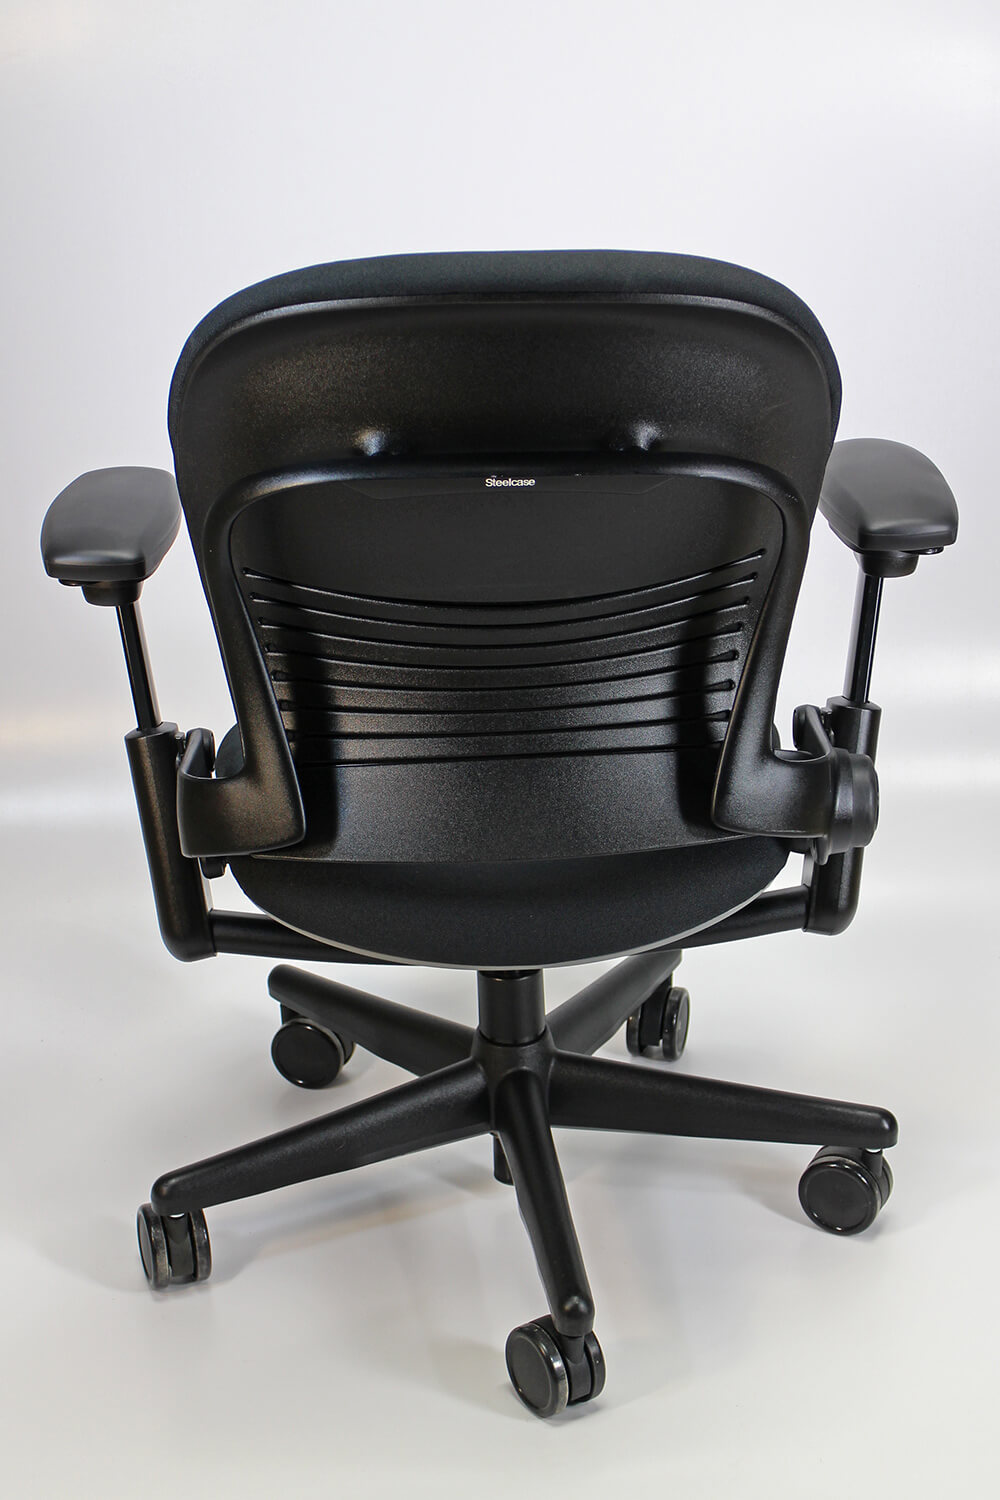 Steelcase leap v1 back view